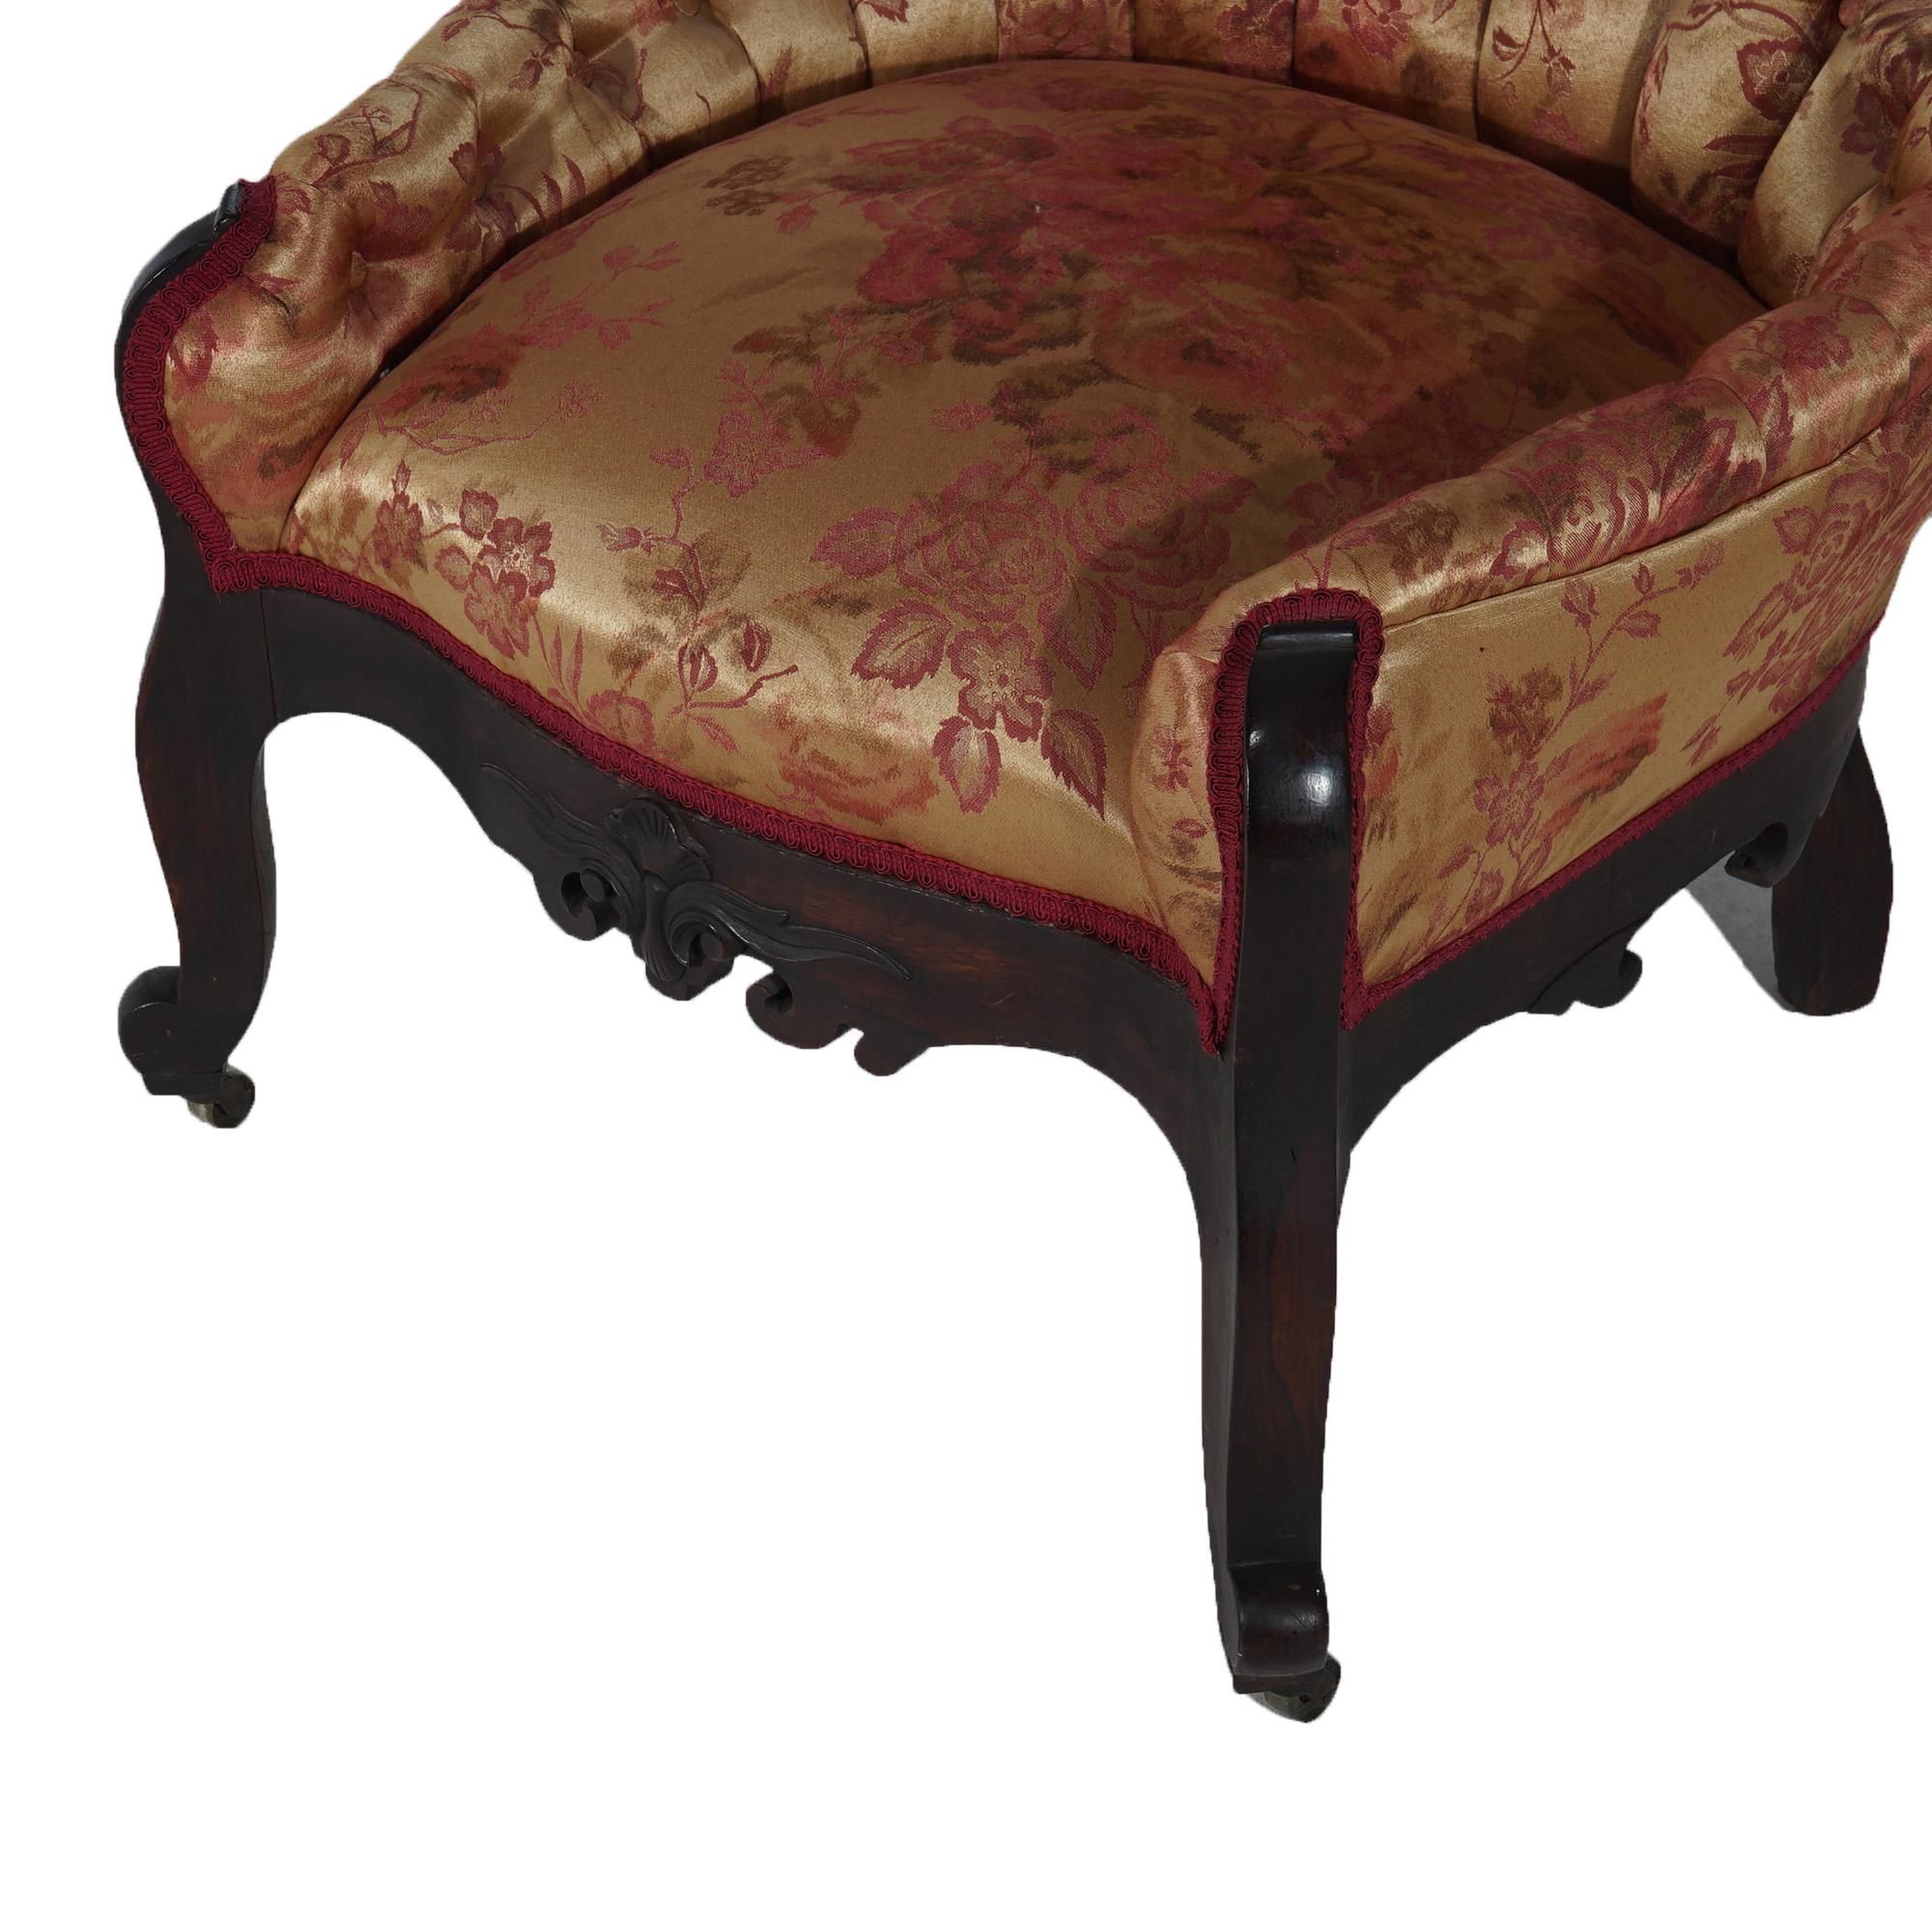 19th Century Antique Victorian Carved Walnut & Upholstered Lady’s Boudoir Chair C1890 For Sale